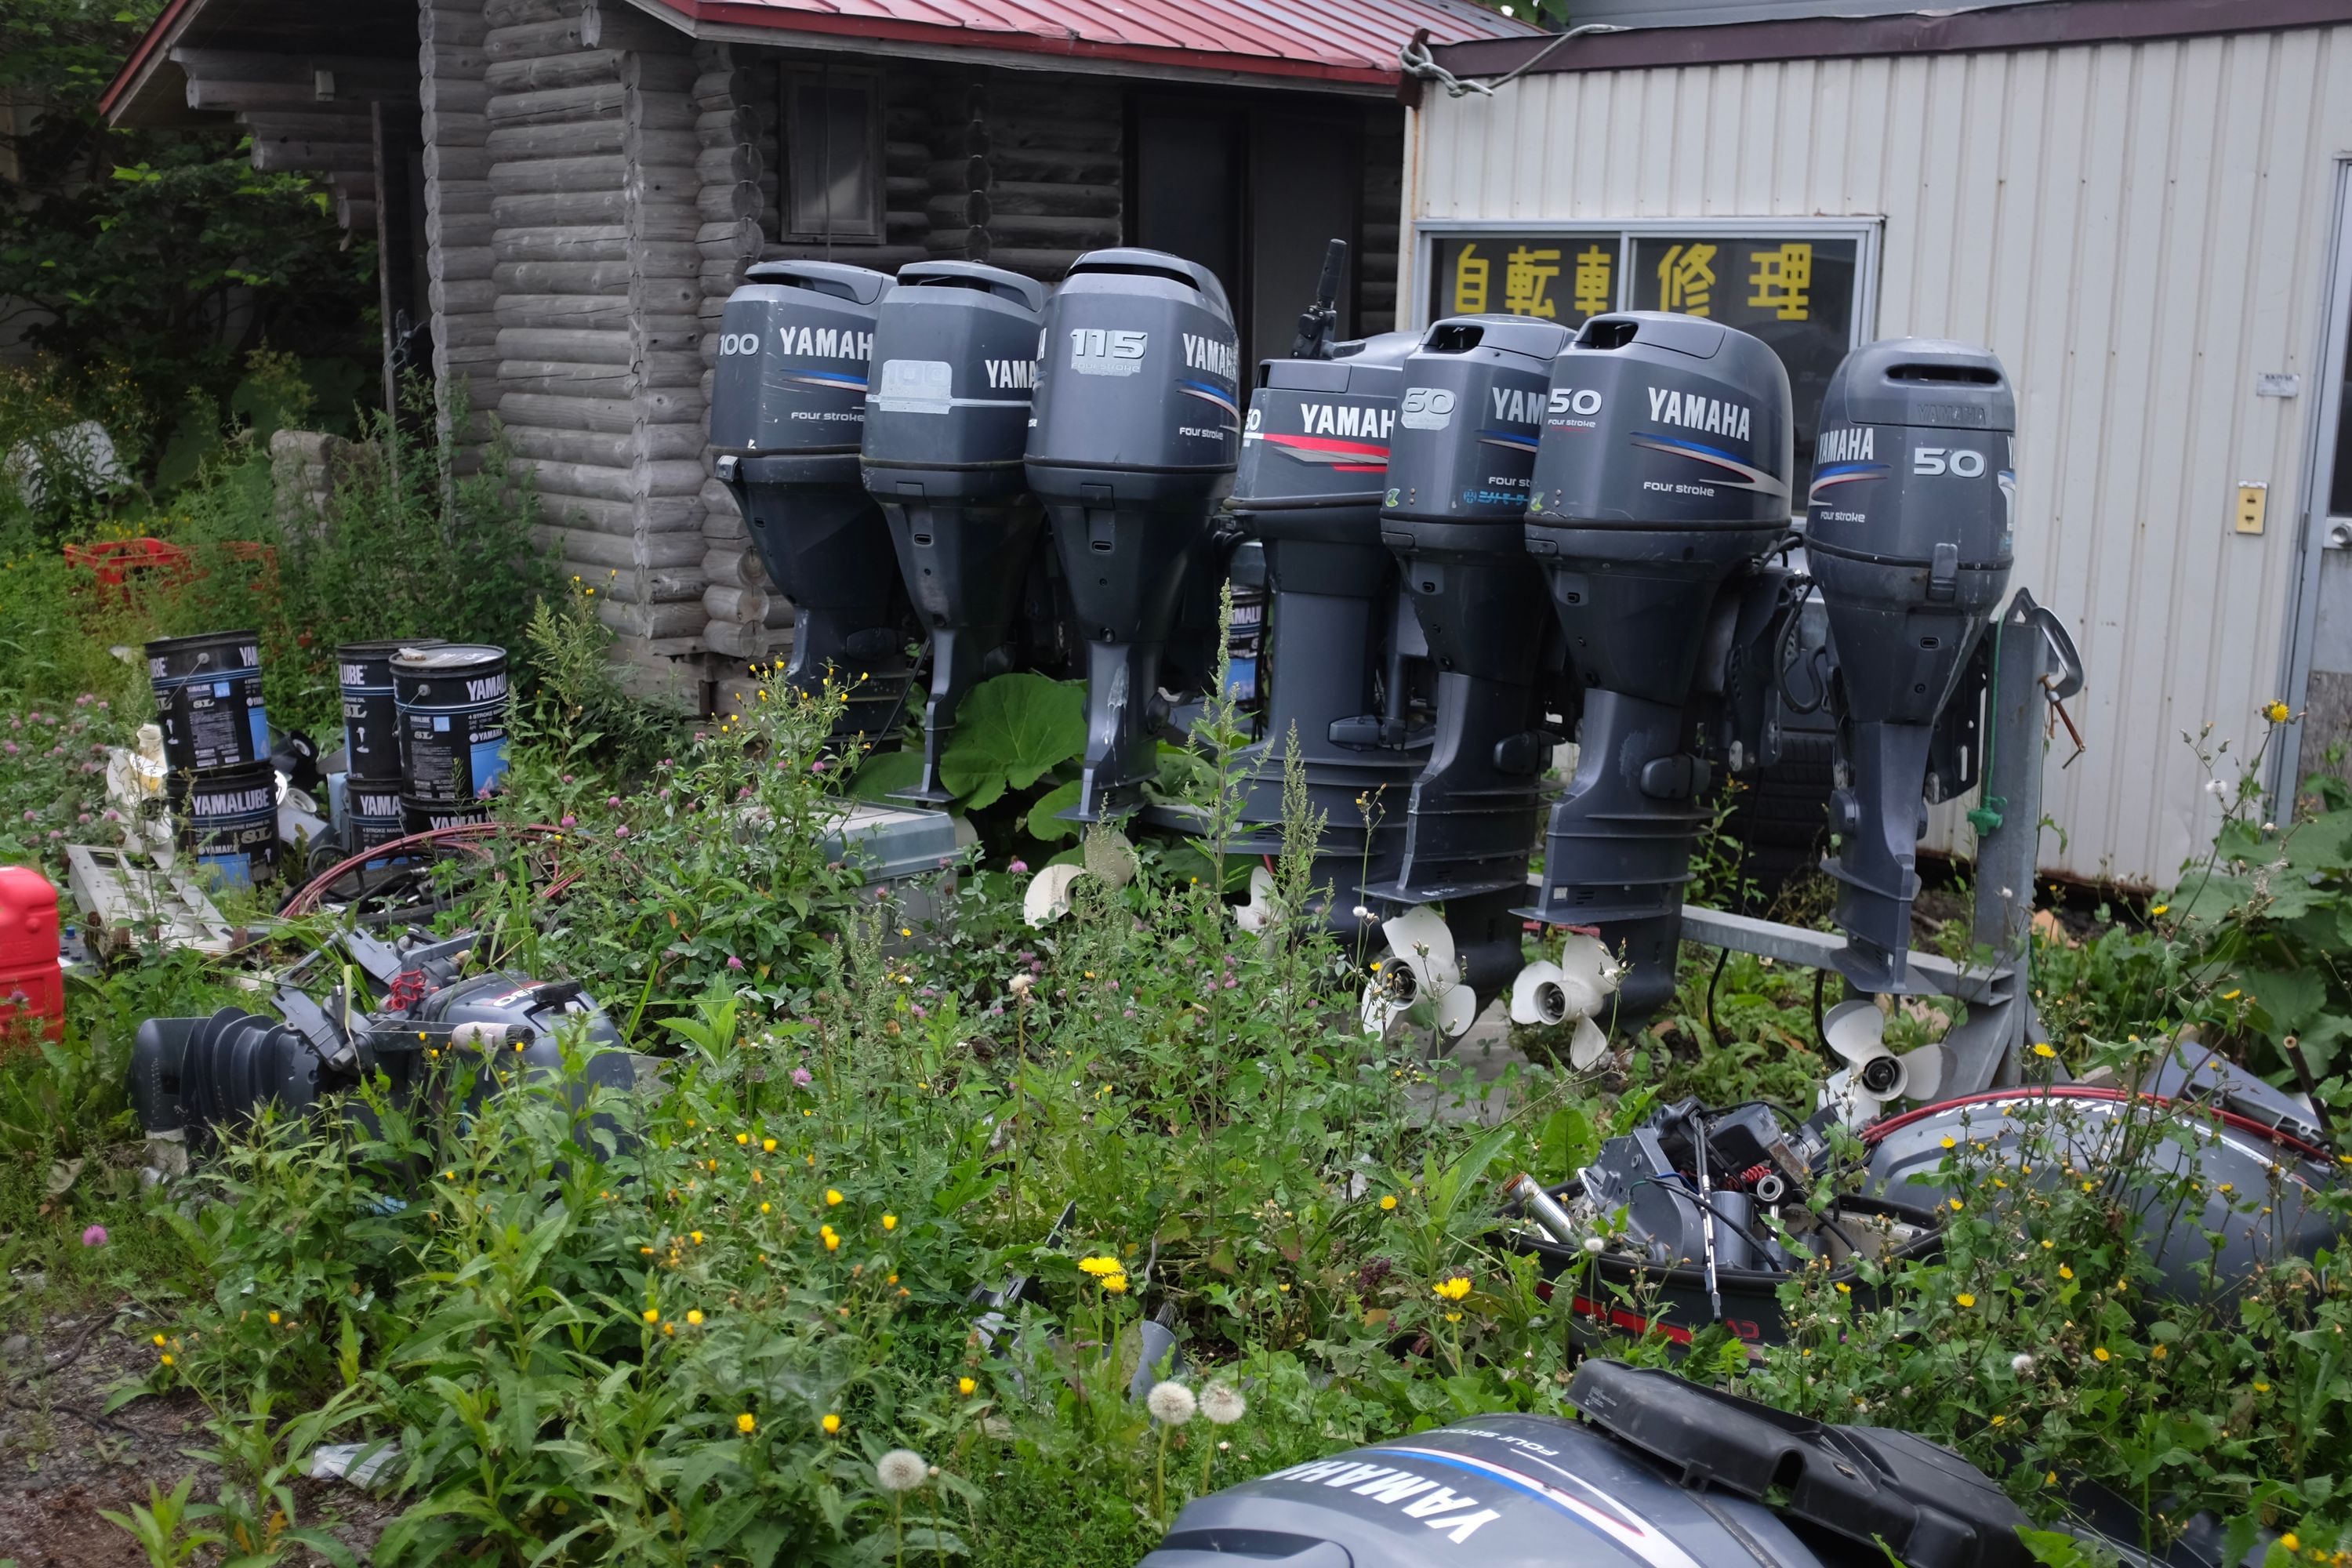 A row of Yamaha outboard engines in an overgrown yard.